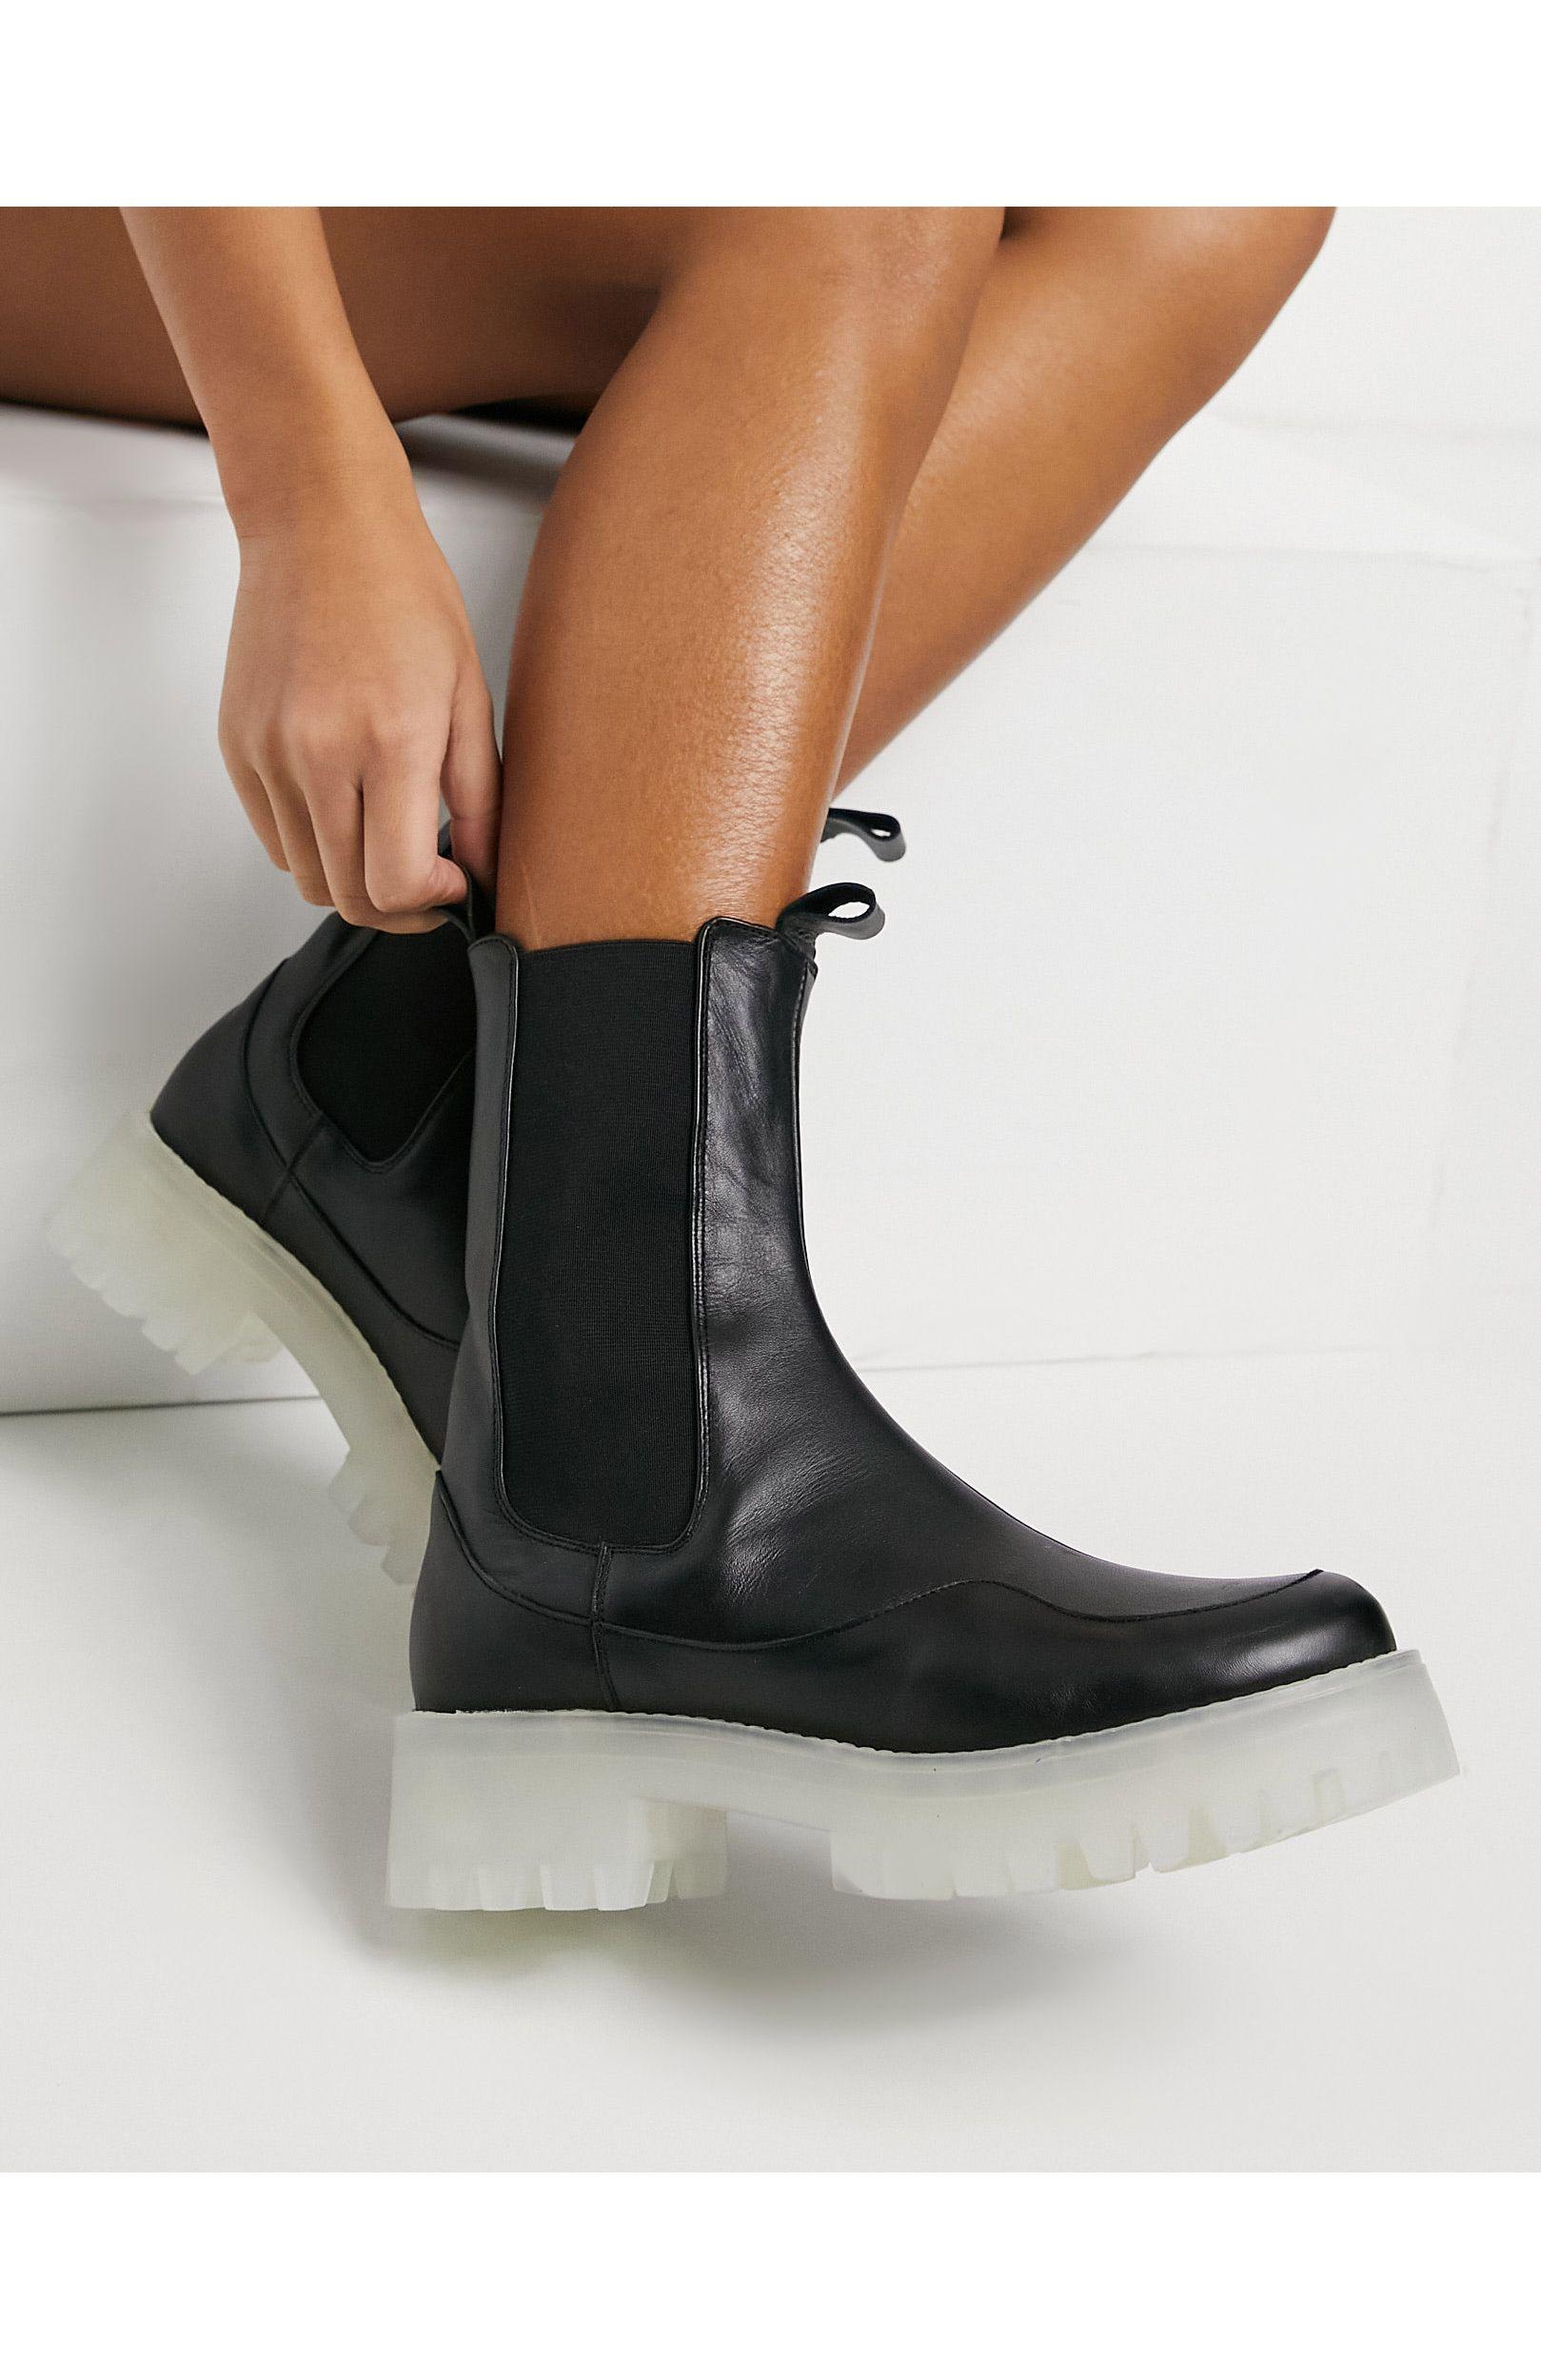 ASOS Admire Premium Leather Chunky Chelsea Boots in Black - Lyst